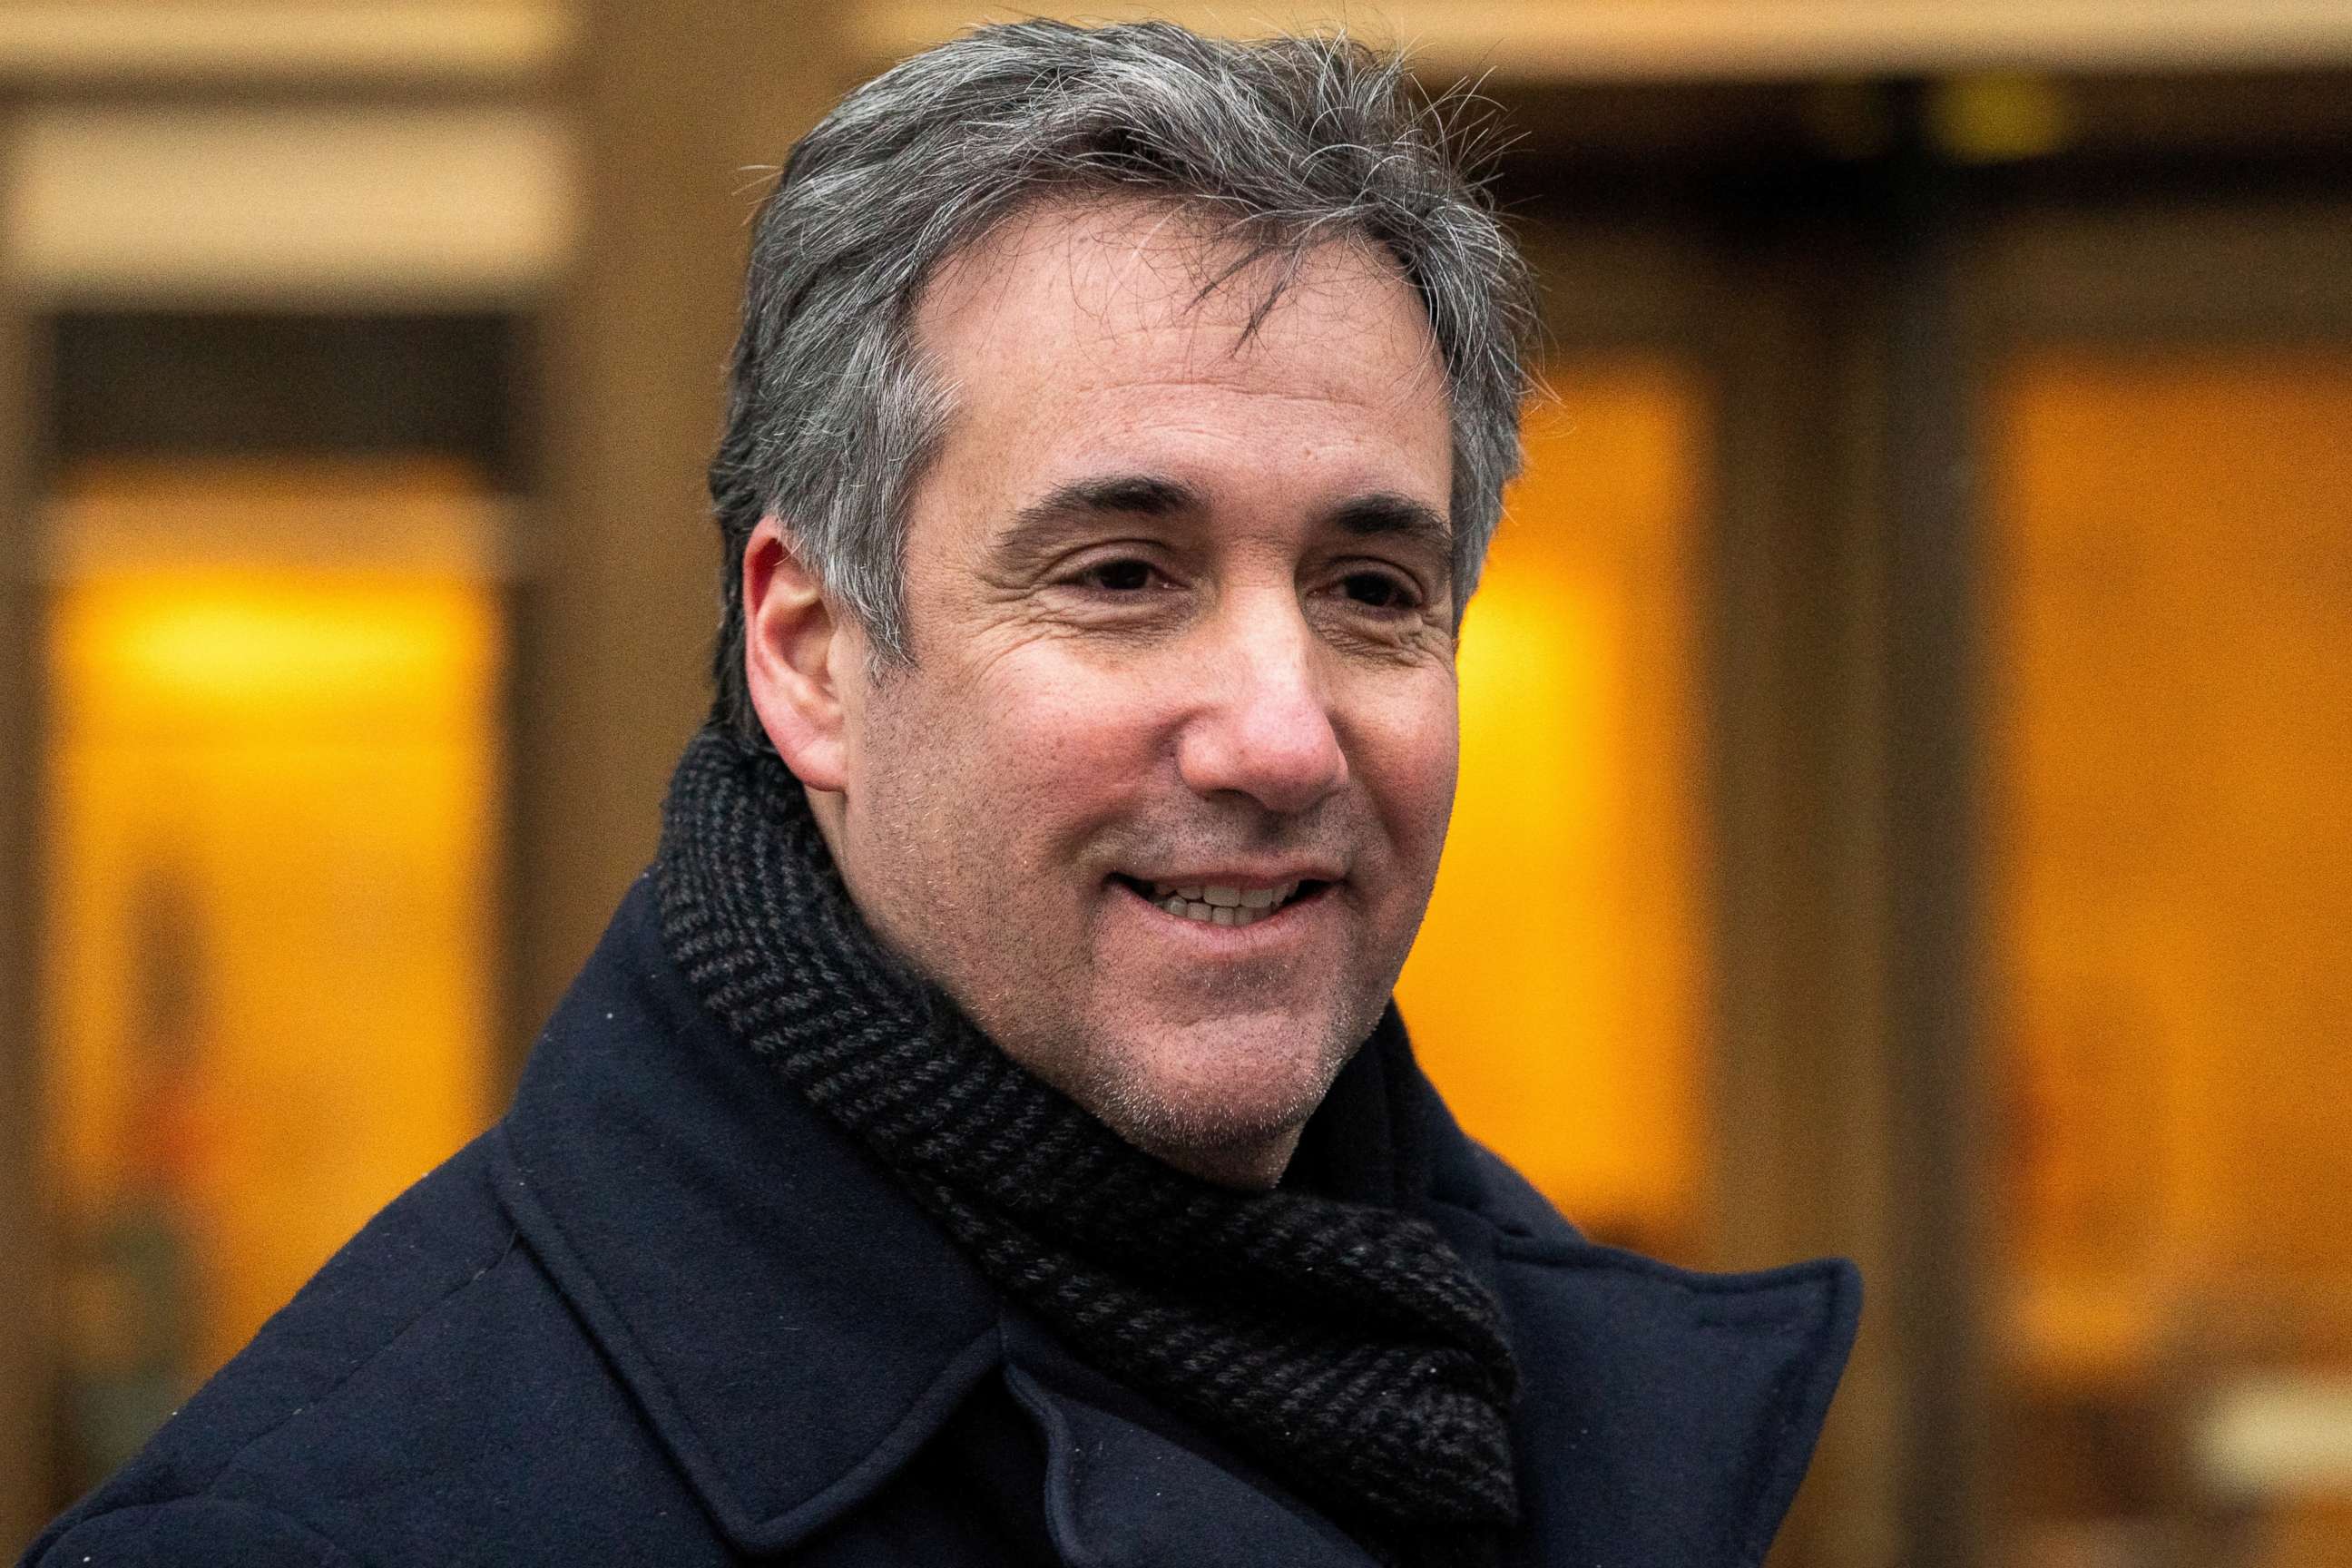 PHOTO: Former President Donald Trump's former lawyer Michael Cohen speaks to members of media at the United States Courthouse in the Manhattan borough of New York City, Jan. 24, 2022.